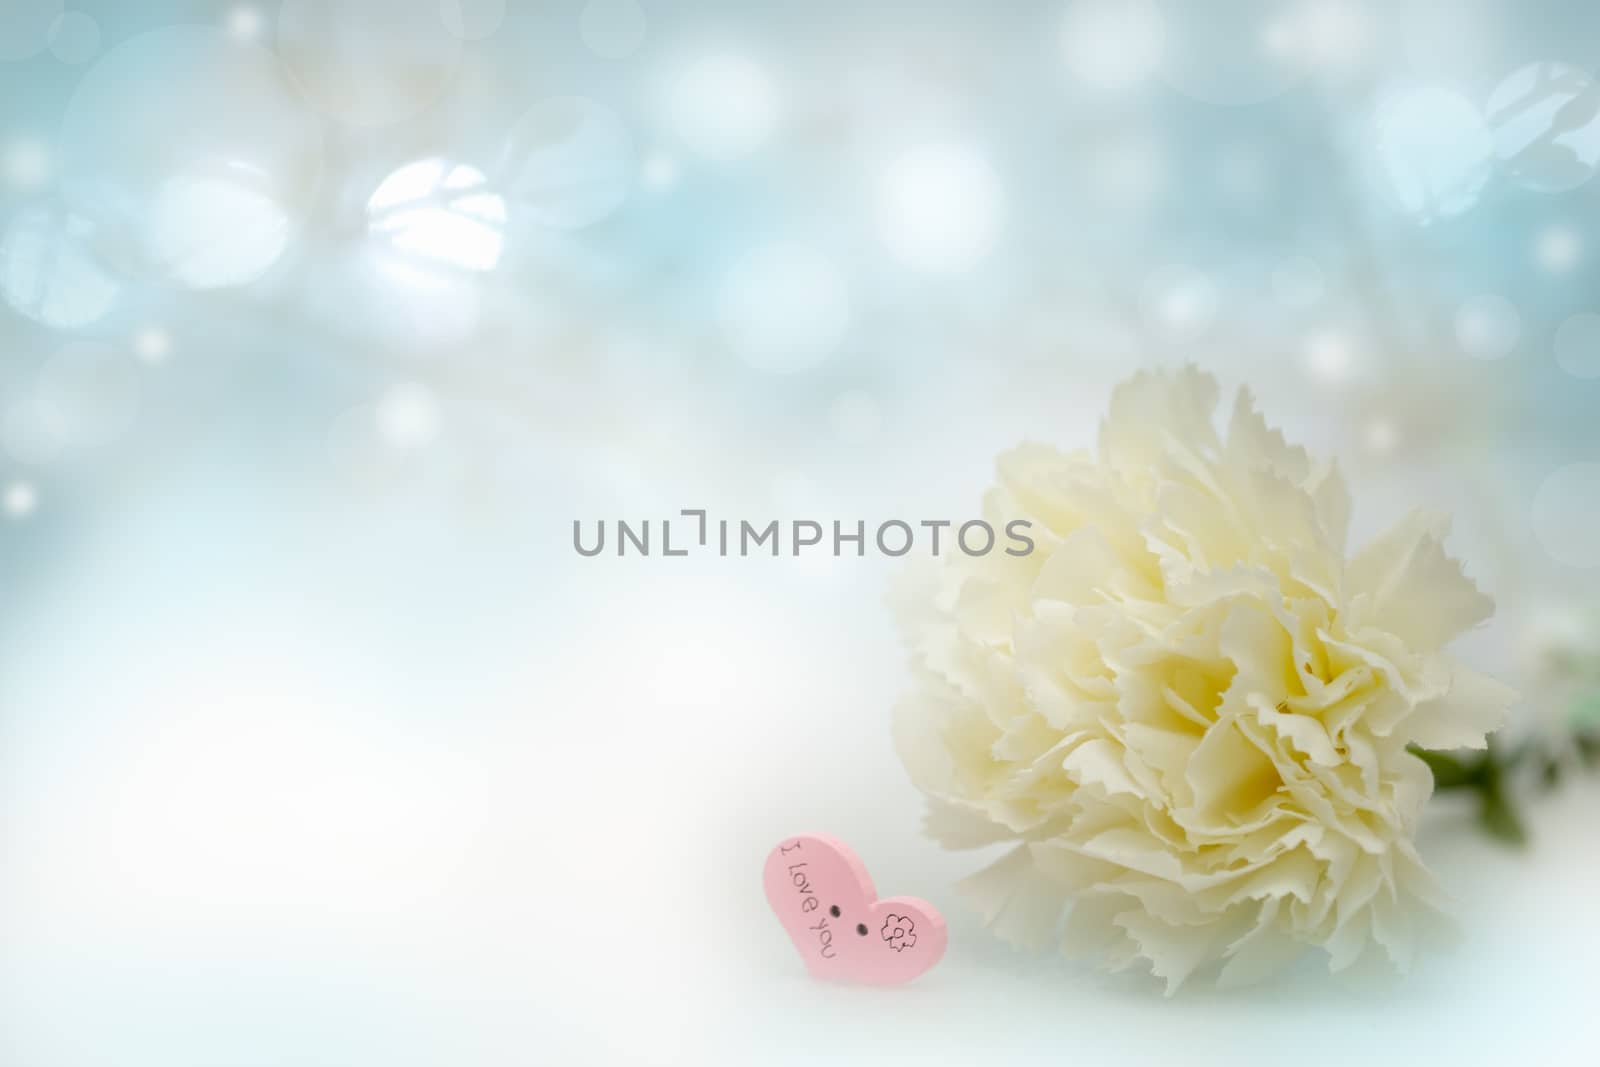 The white flower on abstract bokeh background in love concept for valentines day with romantic moment.